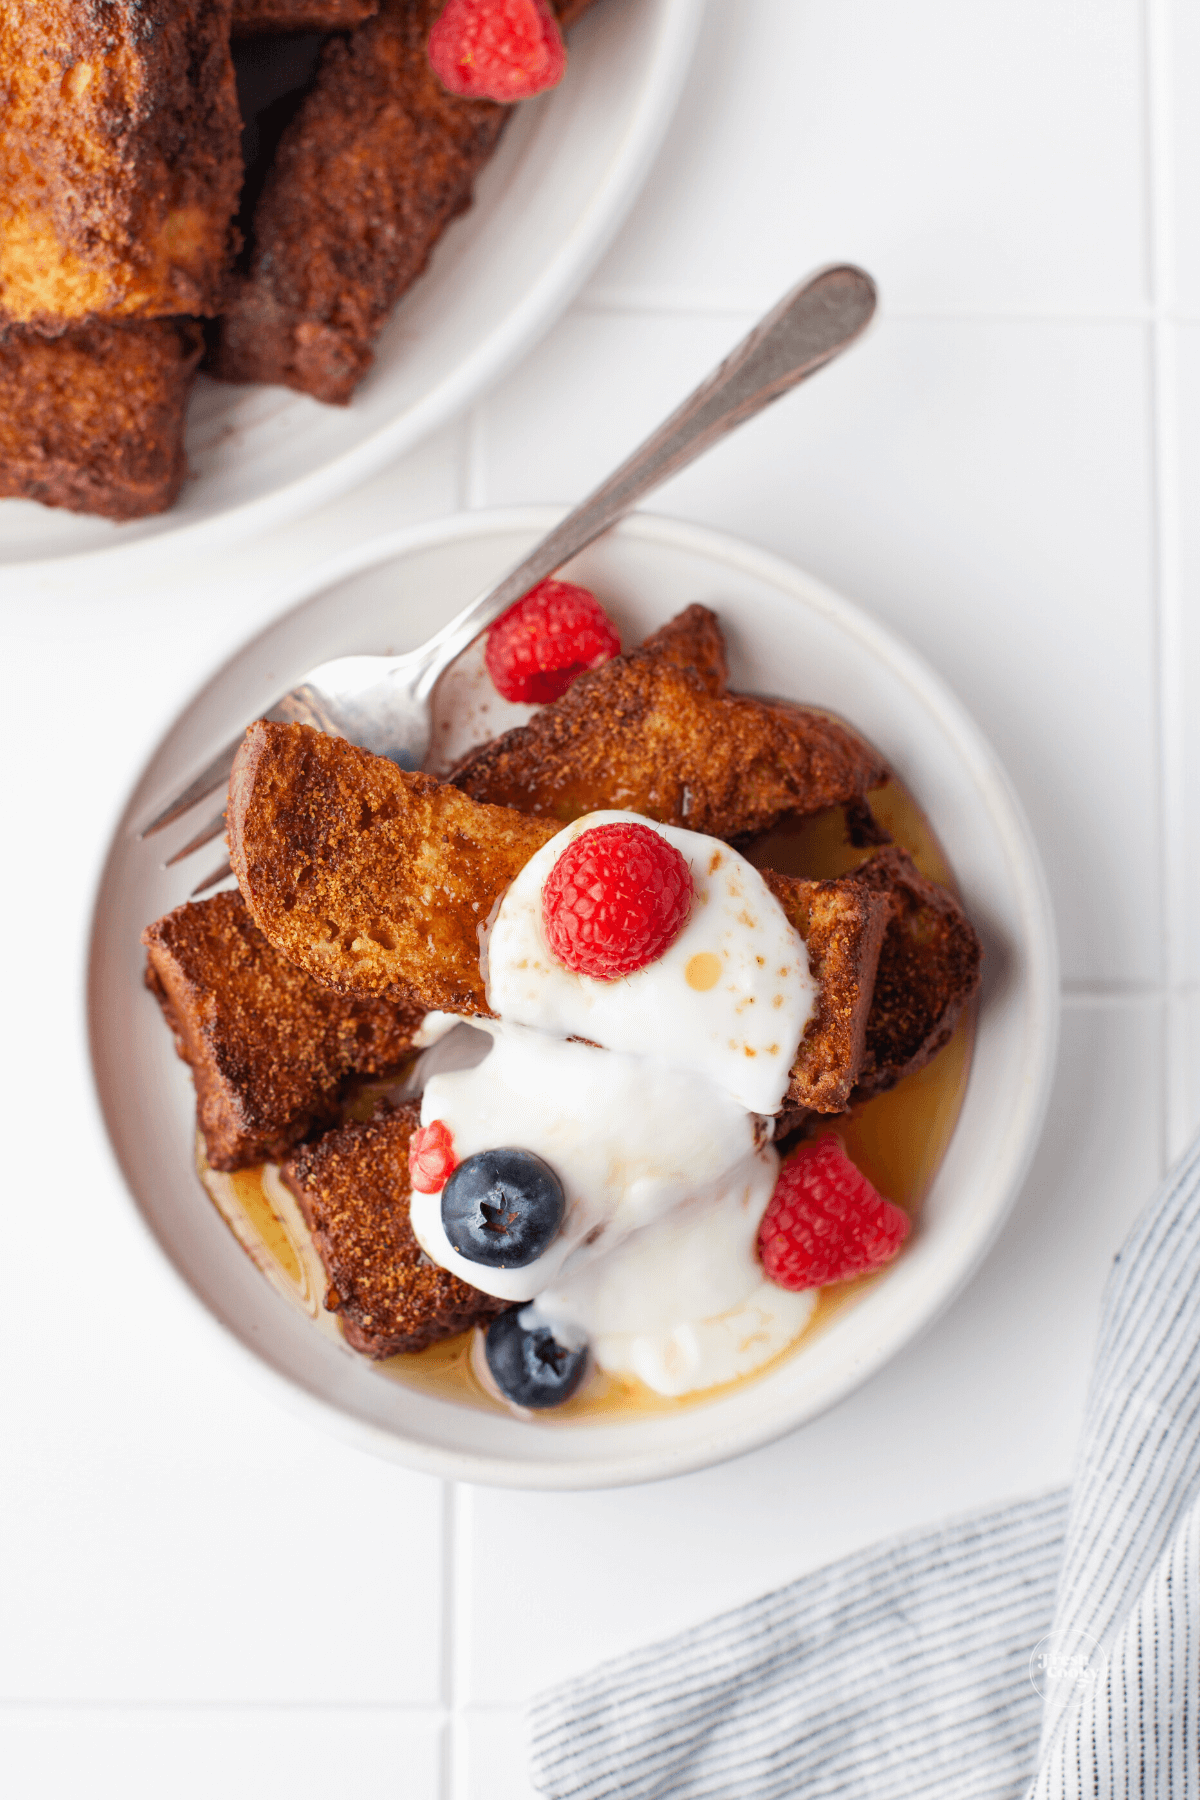 French toast sticks on plate with fork, maple syrup and cream and berries.